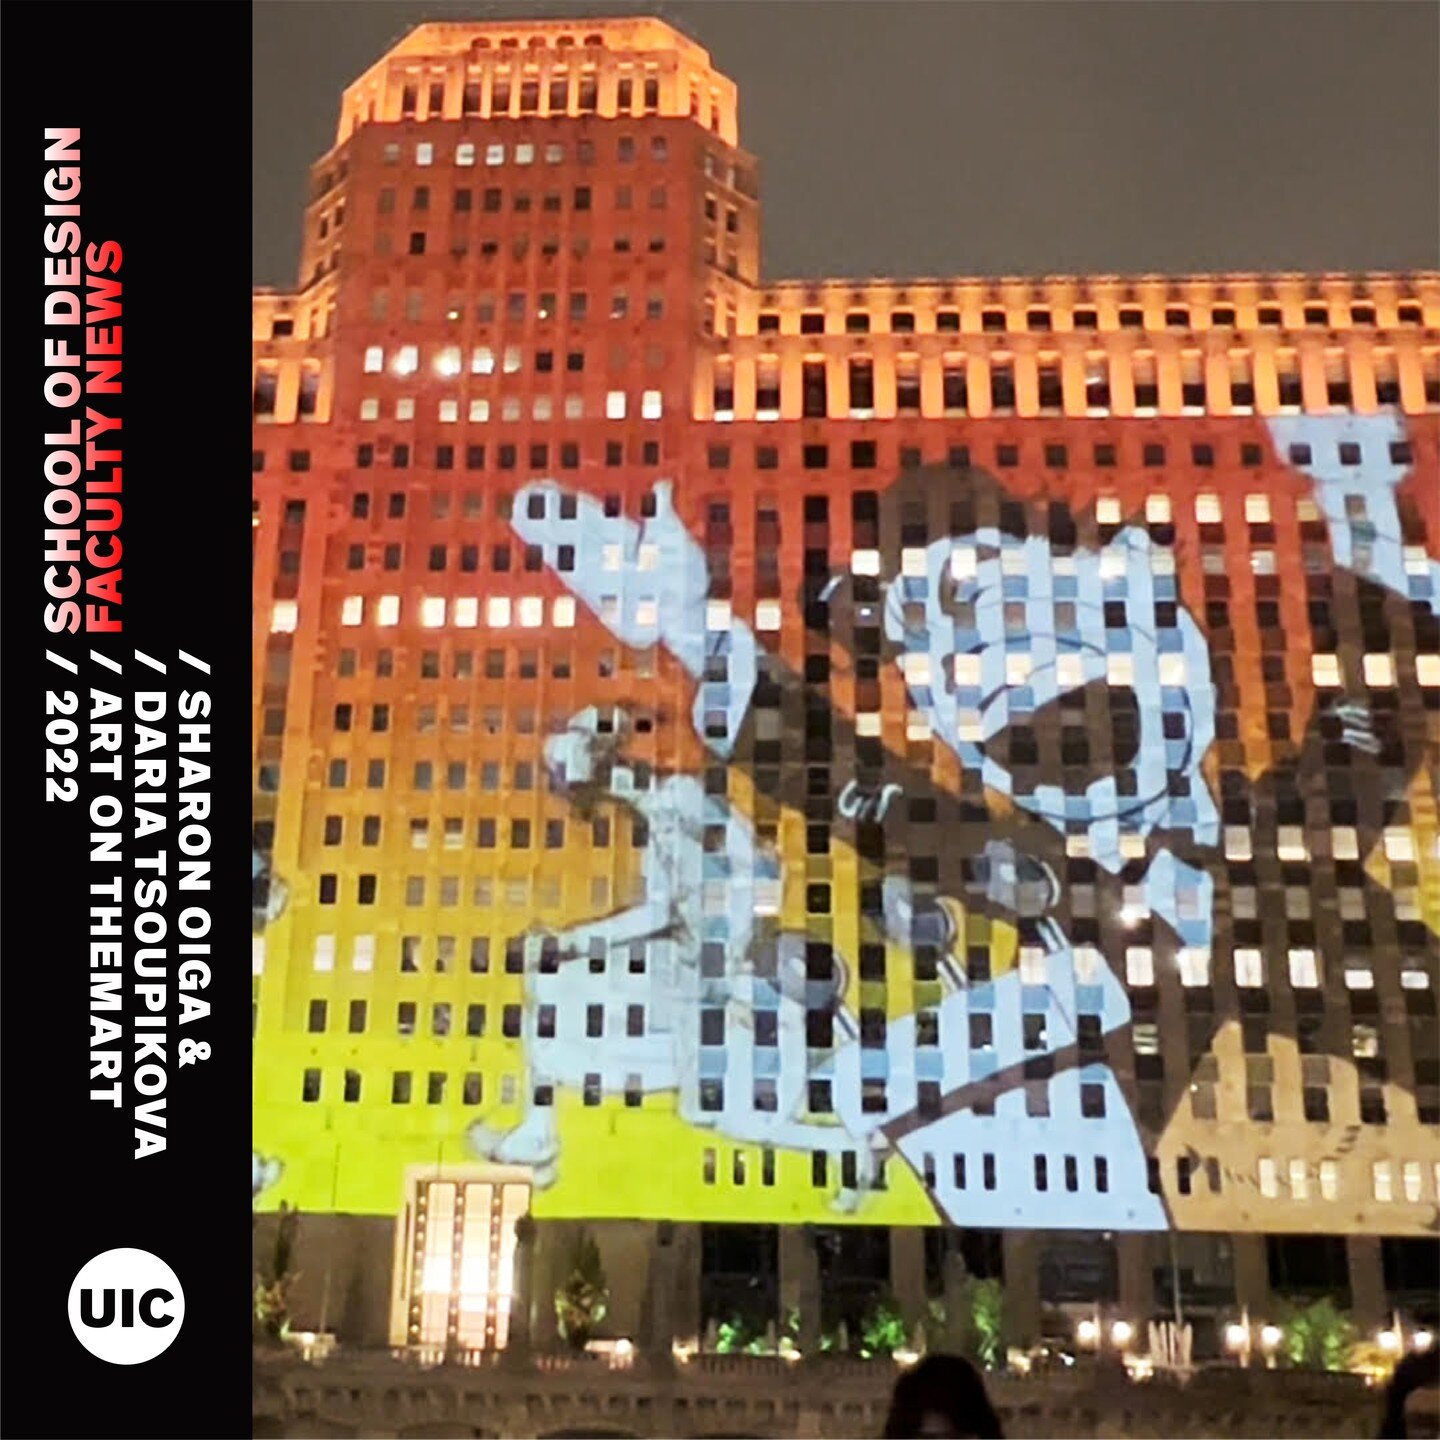 Chicago Design Through the Decades

Outdoor celebration and popup screening! Chicago Design Through the Decades will be featured at Art on theMart, June 11, 9pm celebration, 9:30 pm screening (free &amp; open to the public). We will gather across the